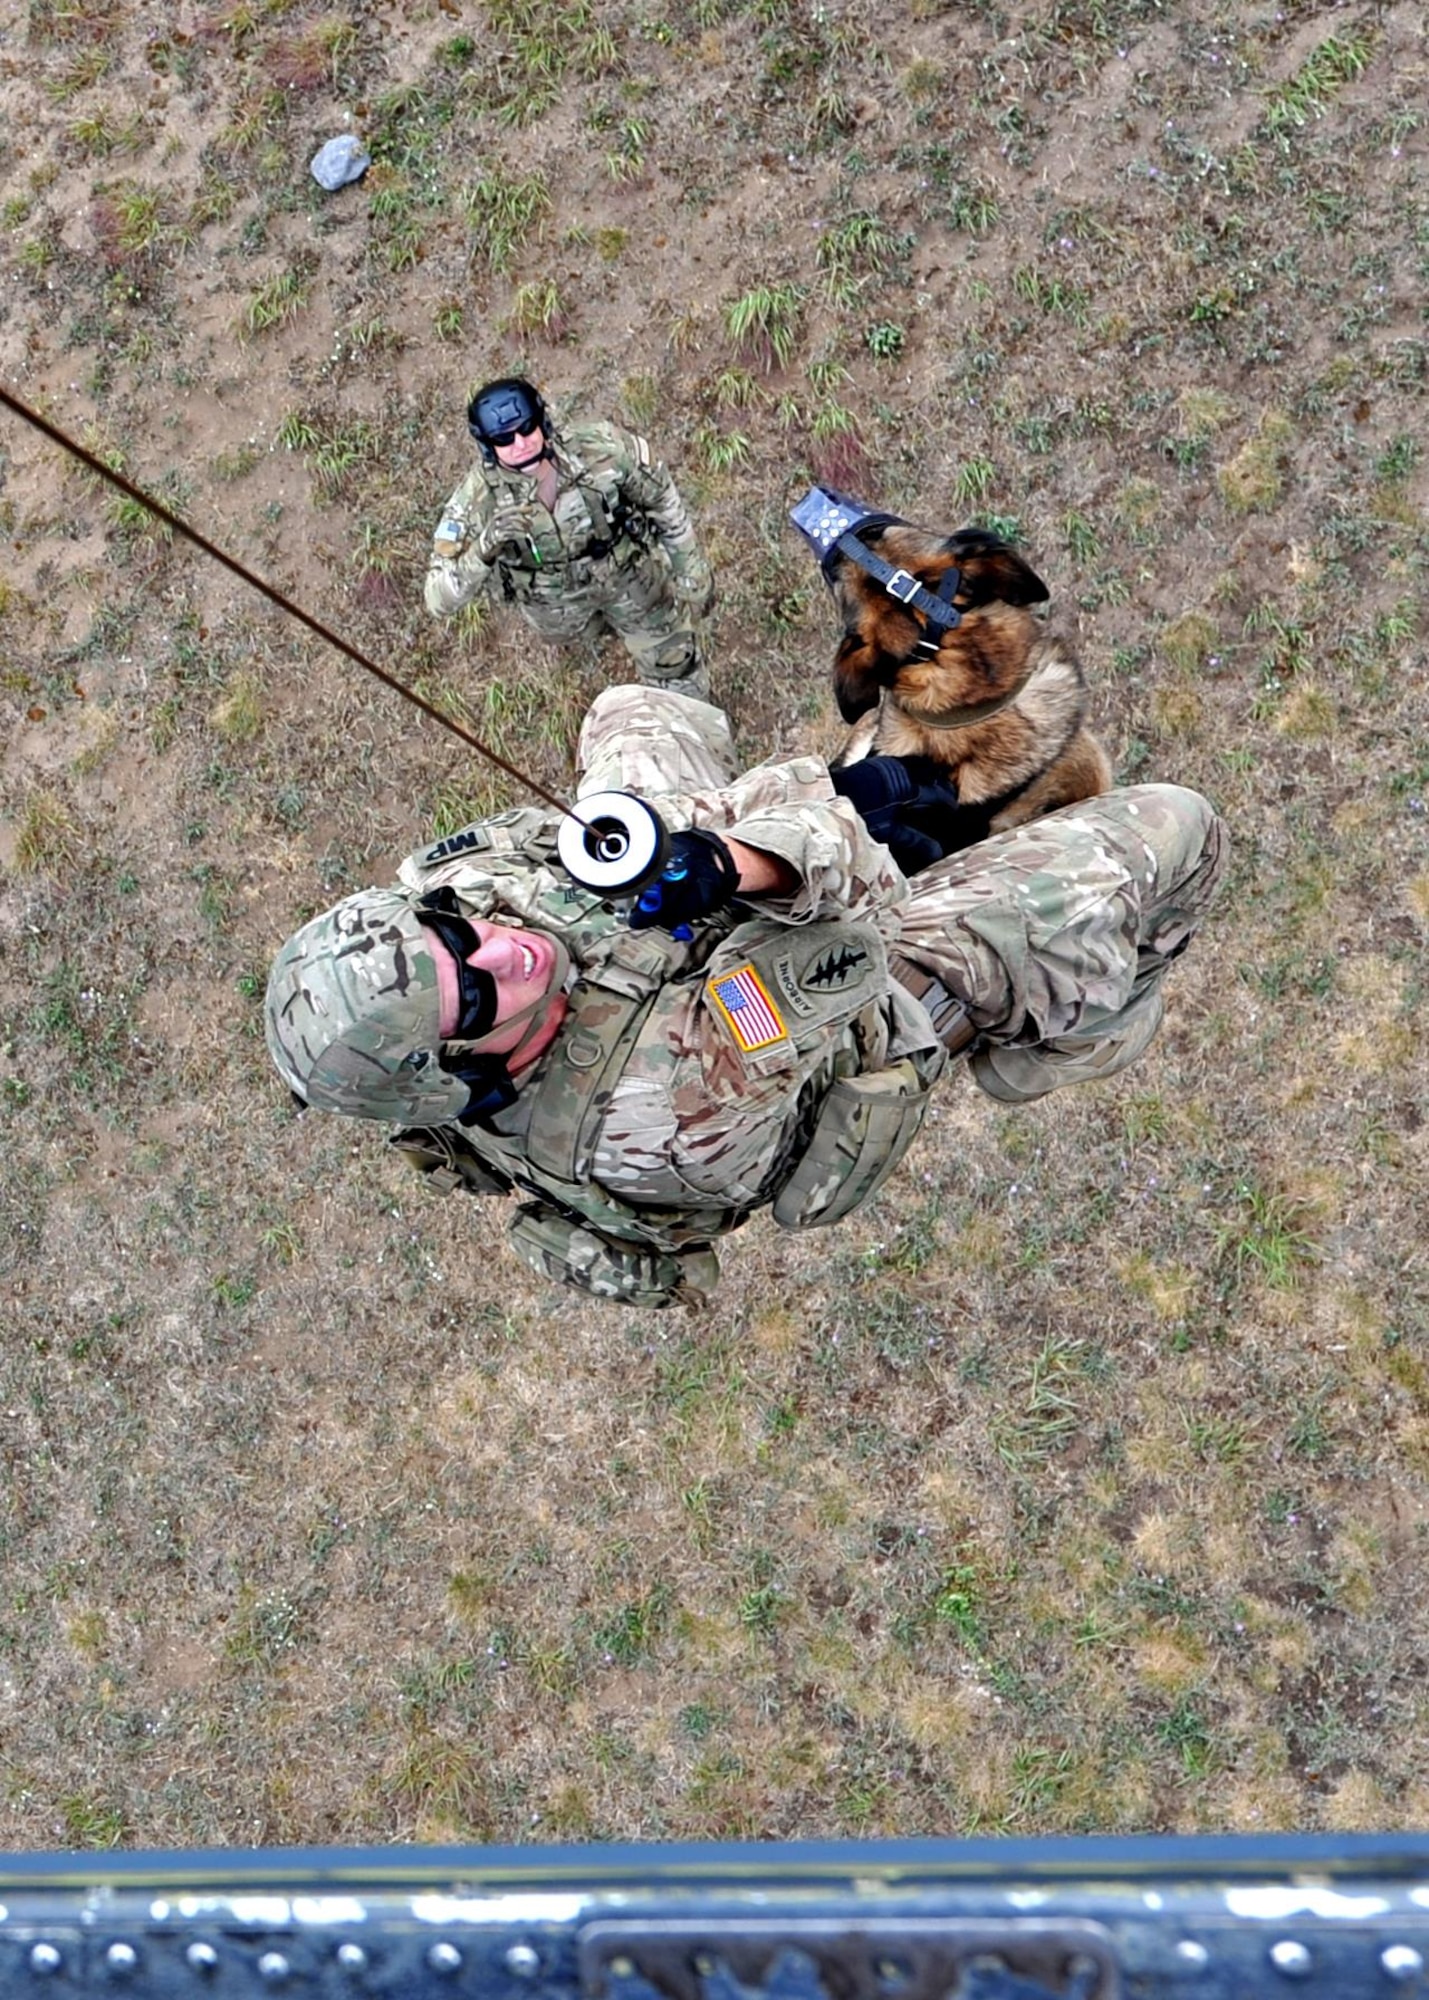 A K-9 handler from the 8th Military Police Detachment, 91st Military Police Battalion, hangs on as he's hoisted with his working dog into a 305th Rescue Squadron HH-60 Aug. 3 at Fort Drum, NY, while Tech. Sgt. Gary Waltz, a 306th Rescue Squadron Survive, Evade, Resist, Escape (SERE) specialist, assists from the ground. Approximately 50 Air Force Reserve Airmen from the 943rd Rescue Group deployed for training to the East coast for joint operations July 31 to Aug 12. (U.S. Air Force photo by Carolyn Herrick)